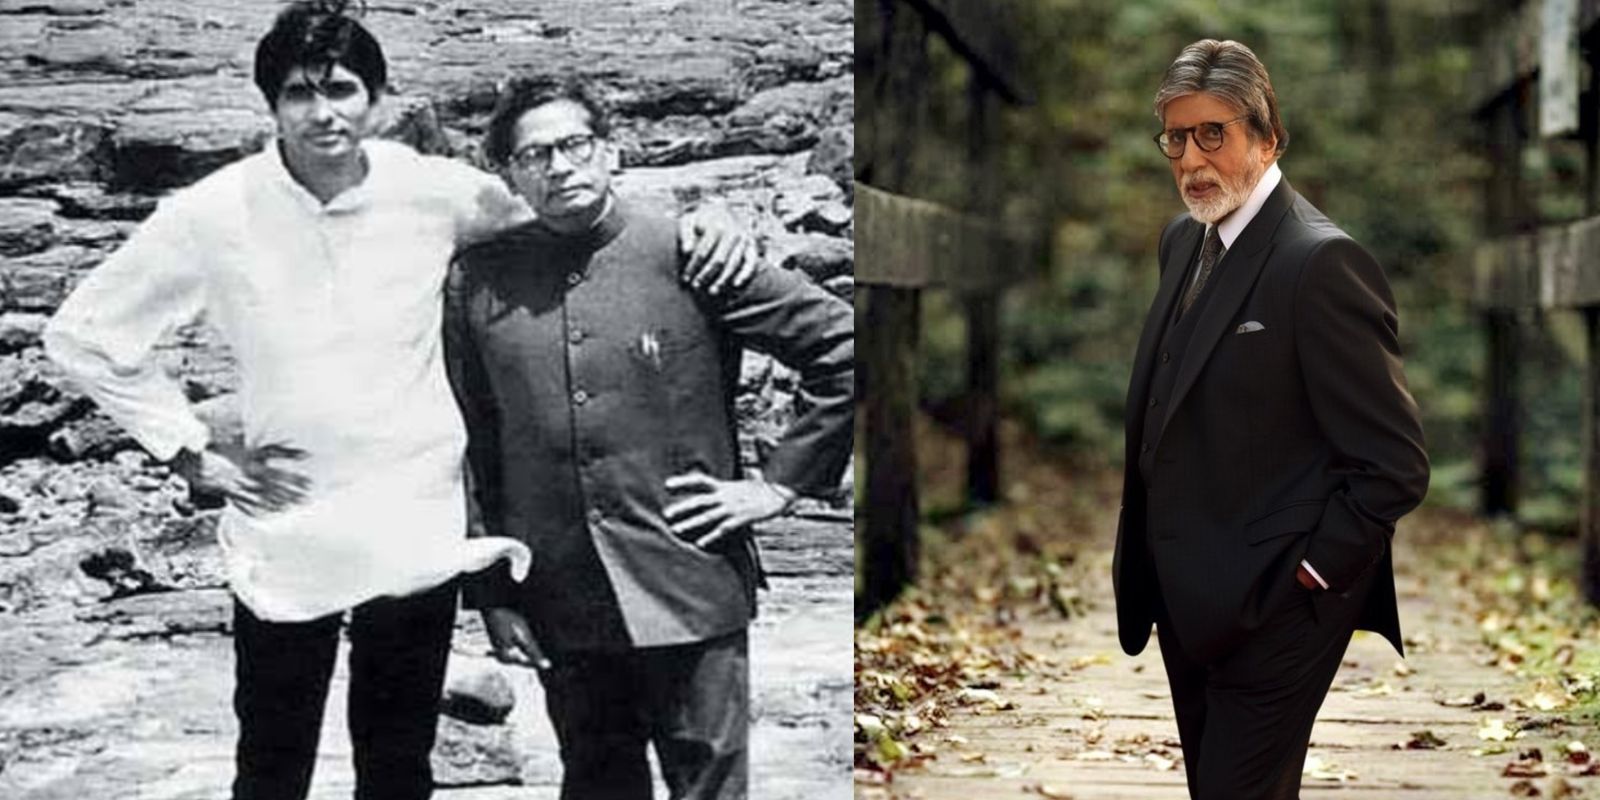 Amitabh Bachchan Looks Dapper In Black In His Latest Post; Fans Call It ‘Origin Of Swag’